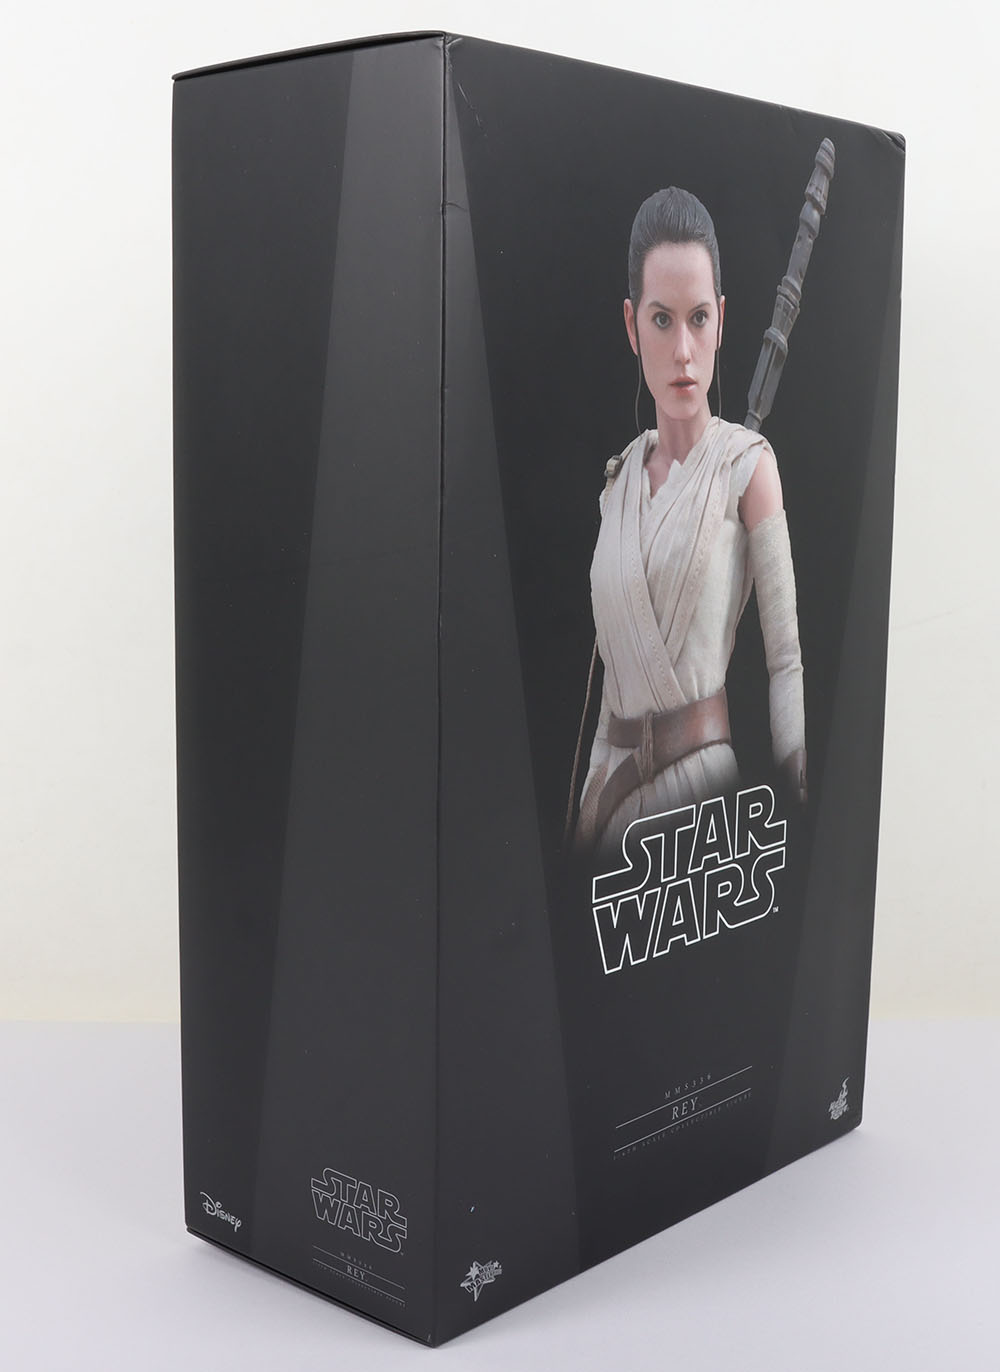 Star Wars Hot Toys Rey Action Figure - Image 5 of 6